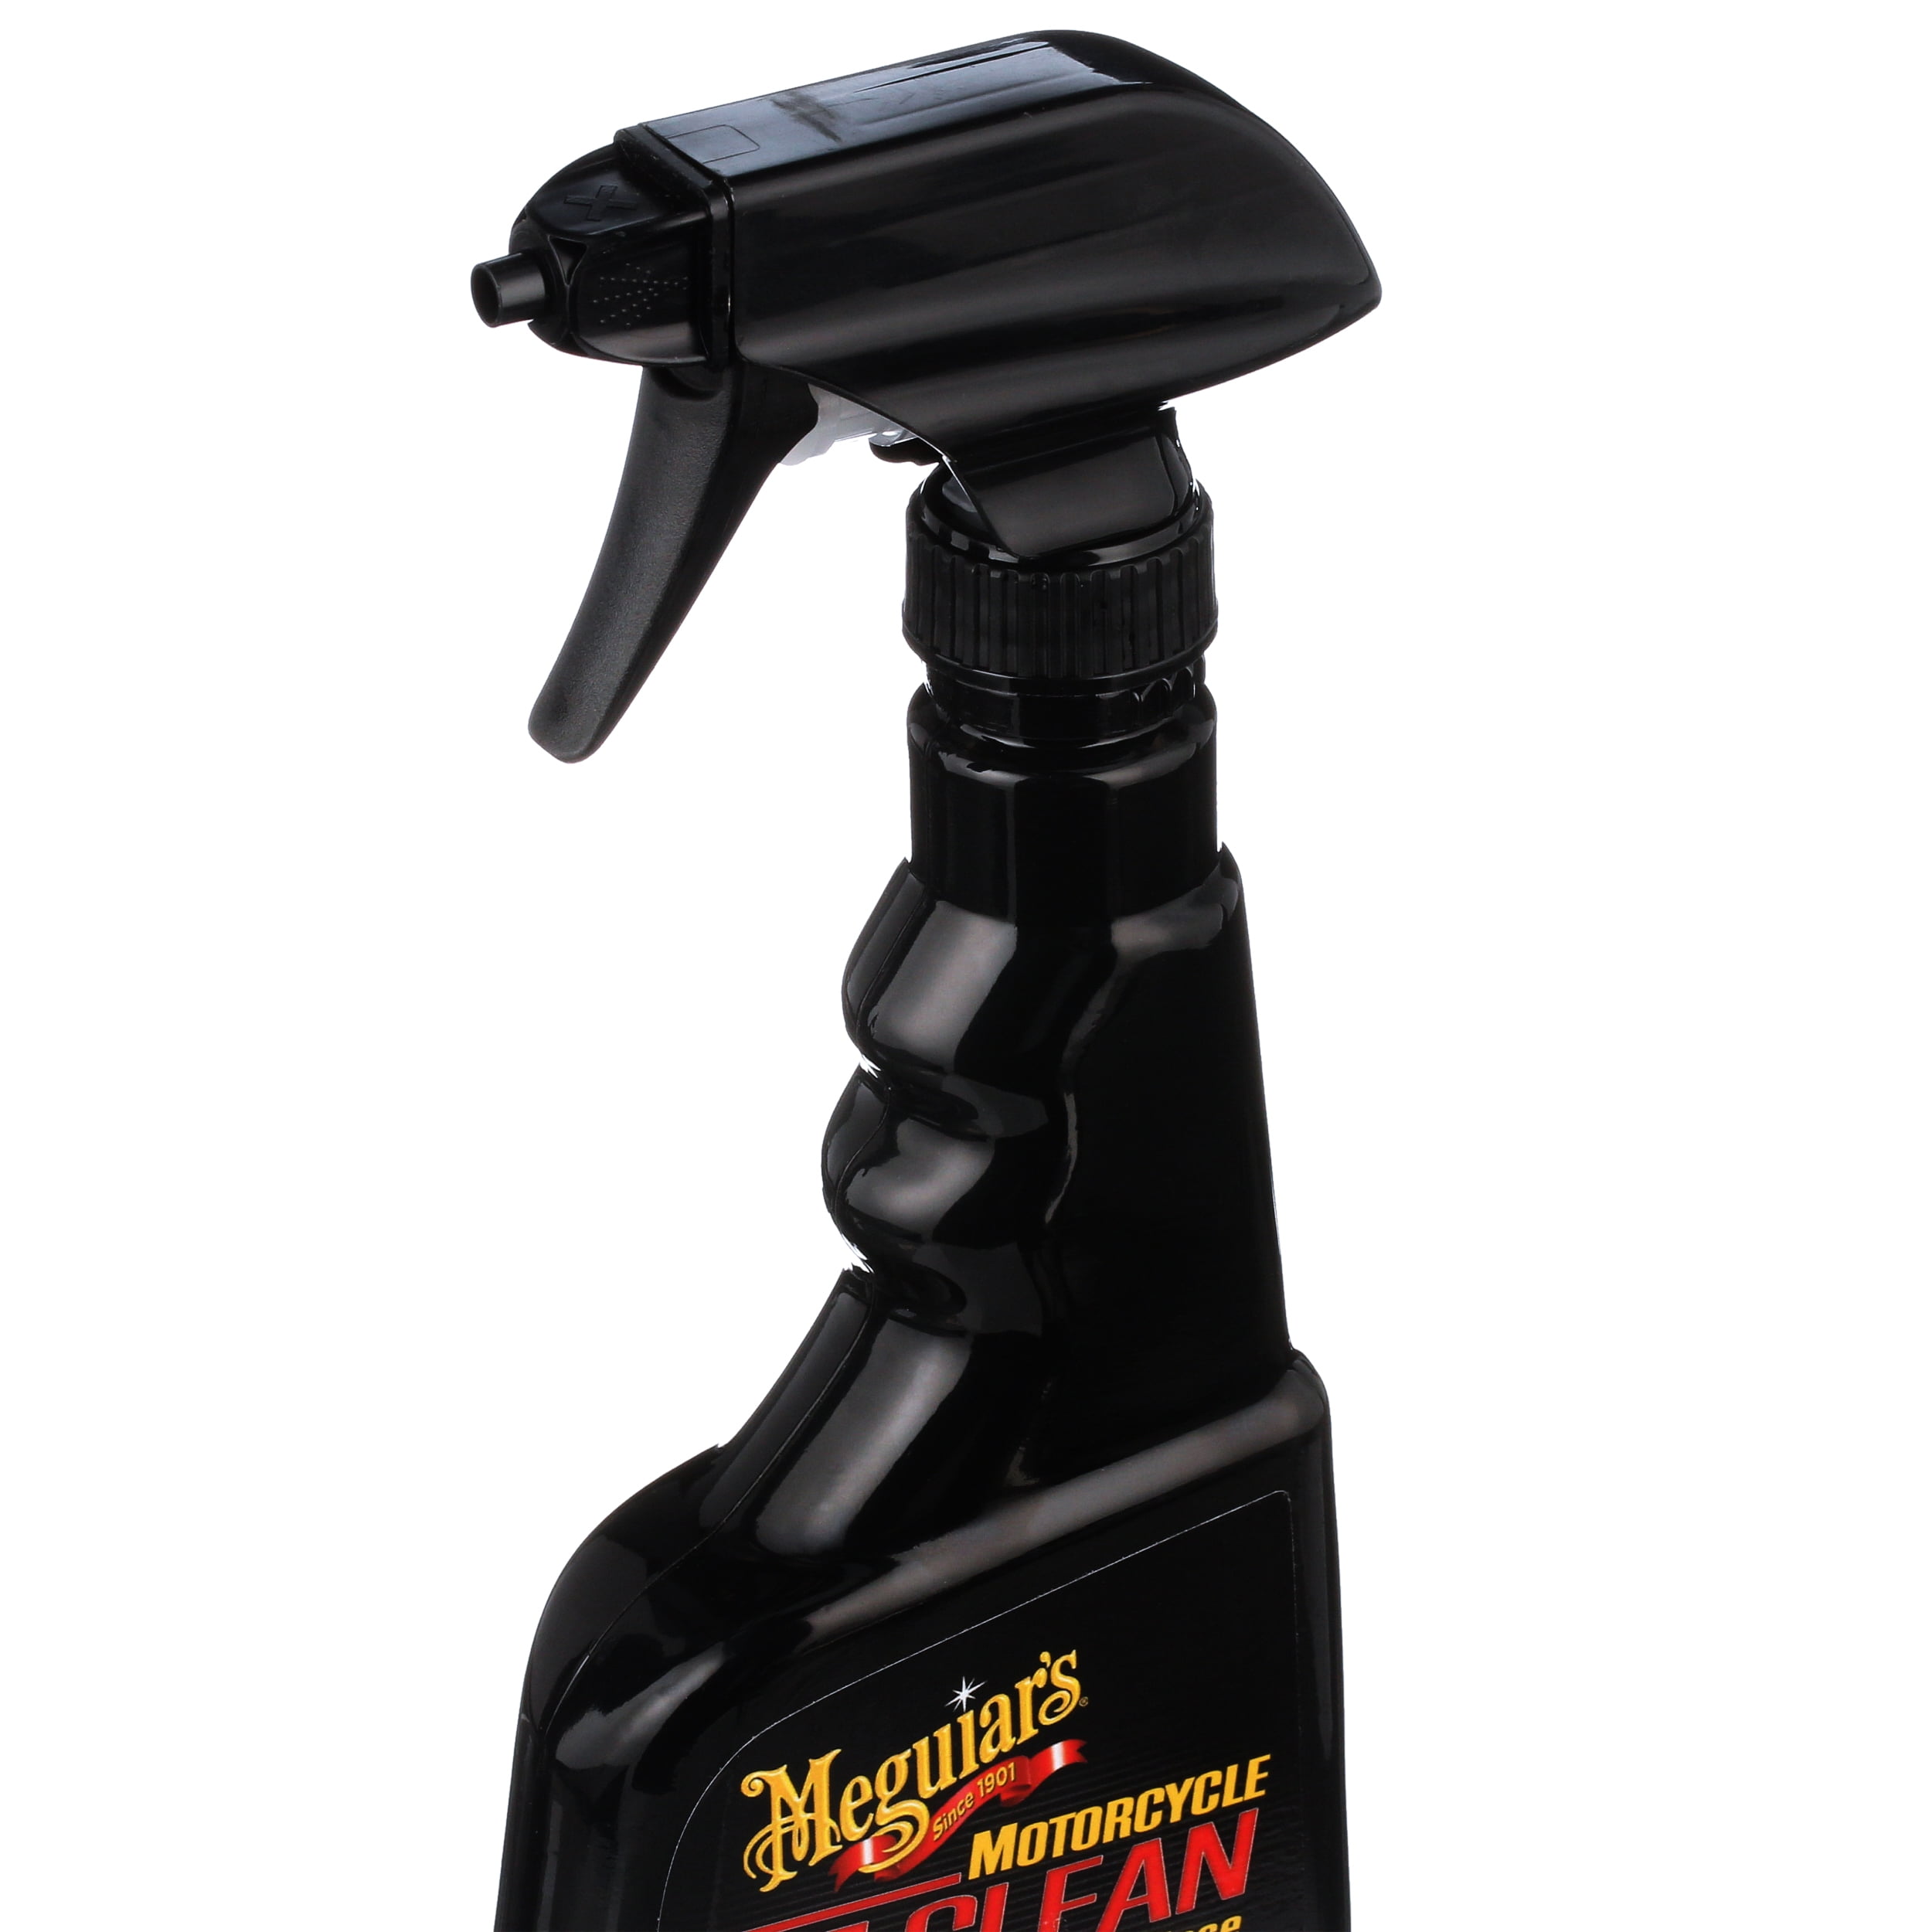 360 Products-Cycle Mist-Motorcycle Spray Wax Cleaner – 360 PRODUCTS